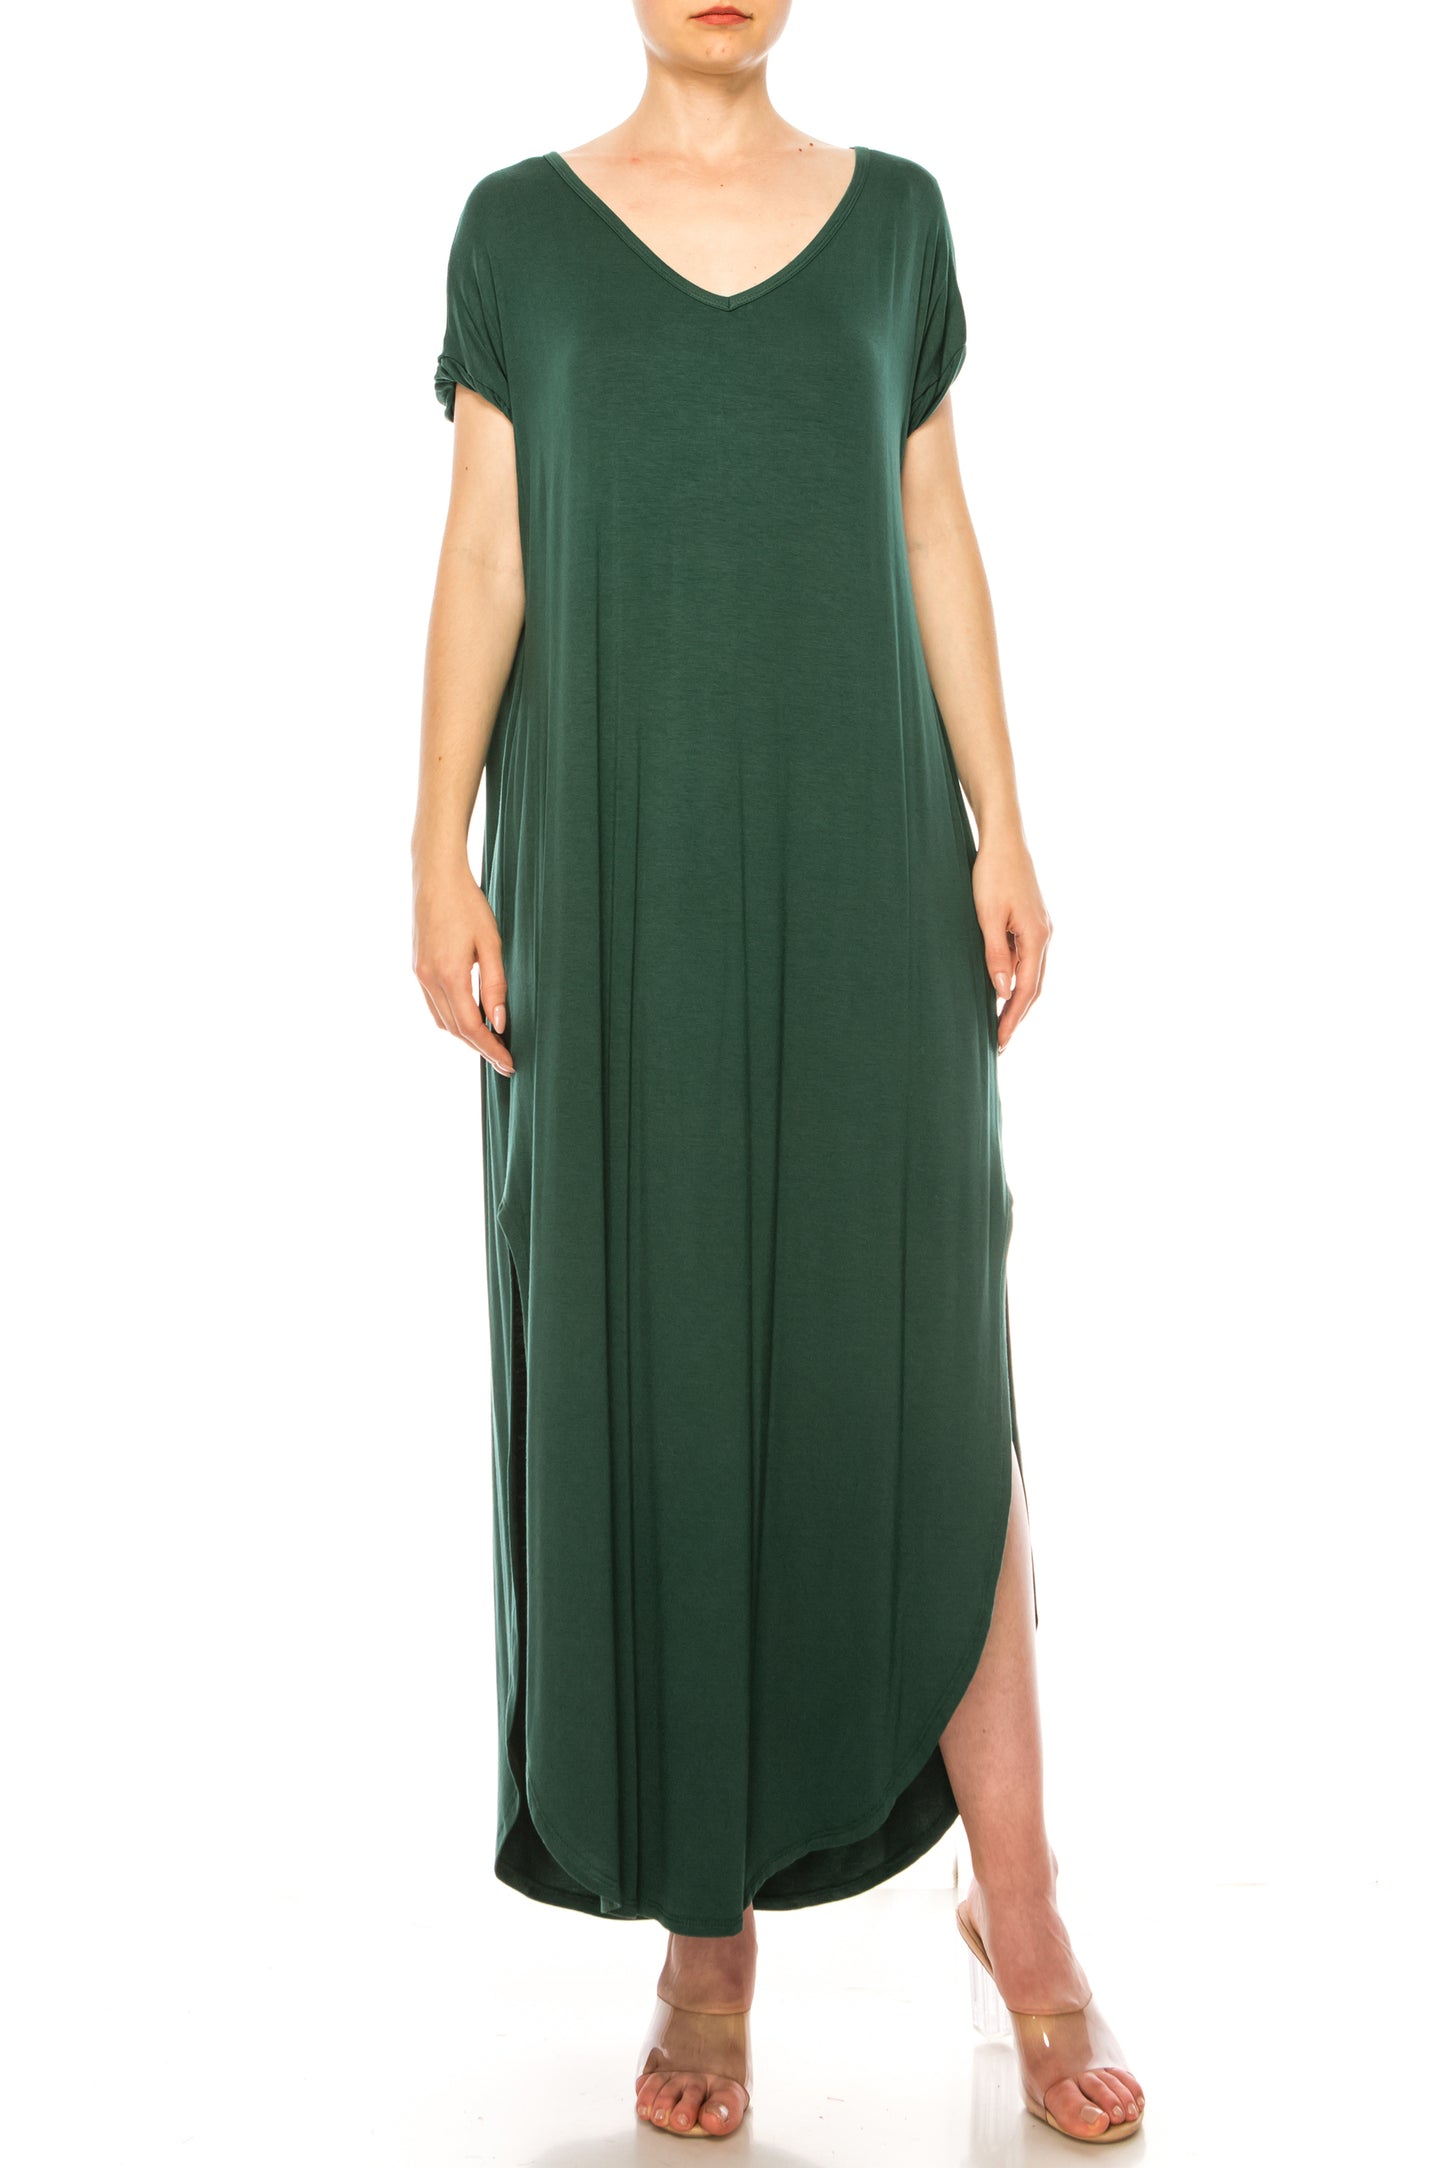 Women's Solid Color Oversized Maxi Dress